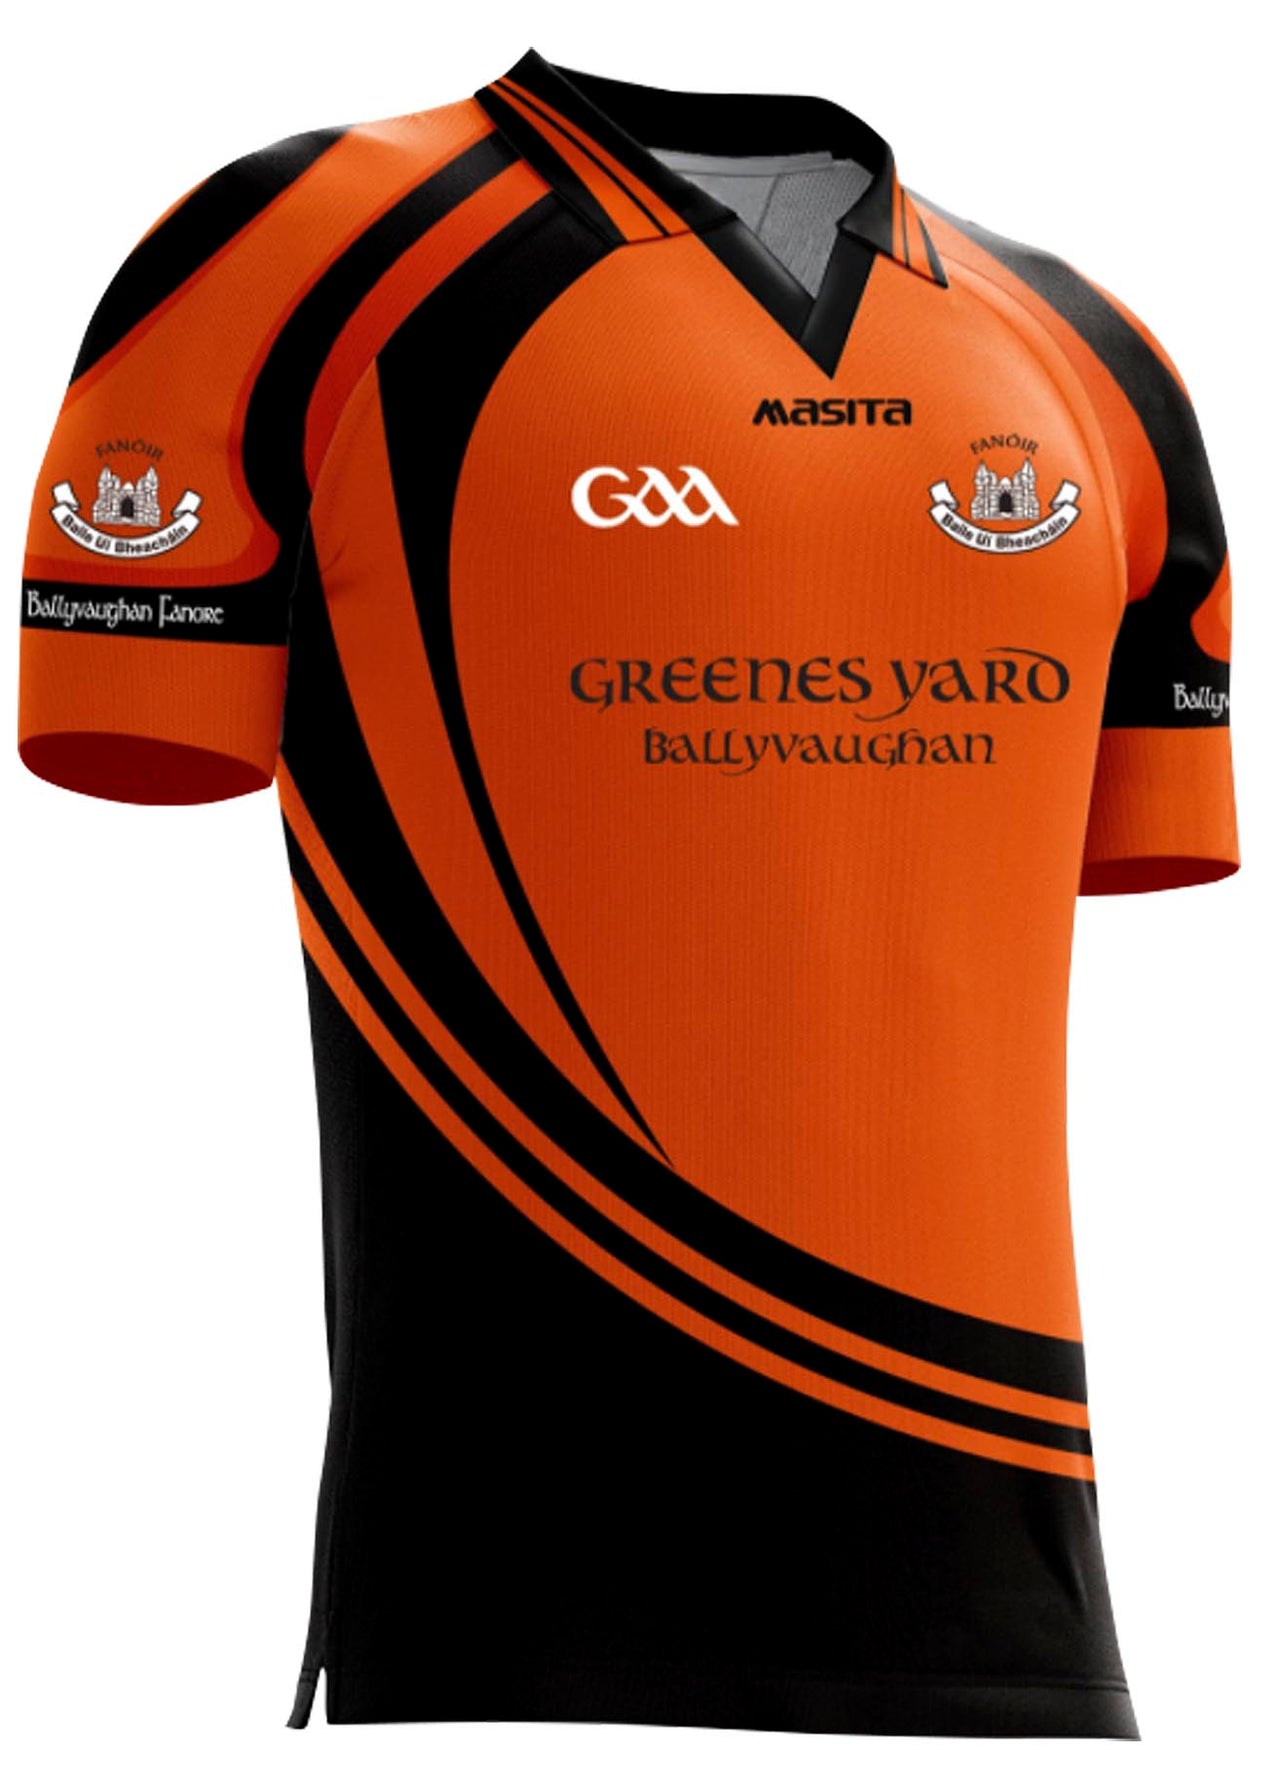 Ballyvaughan Fanore Home Jersey Regular Fit Adult